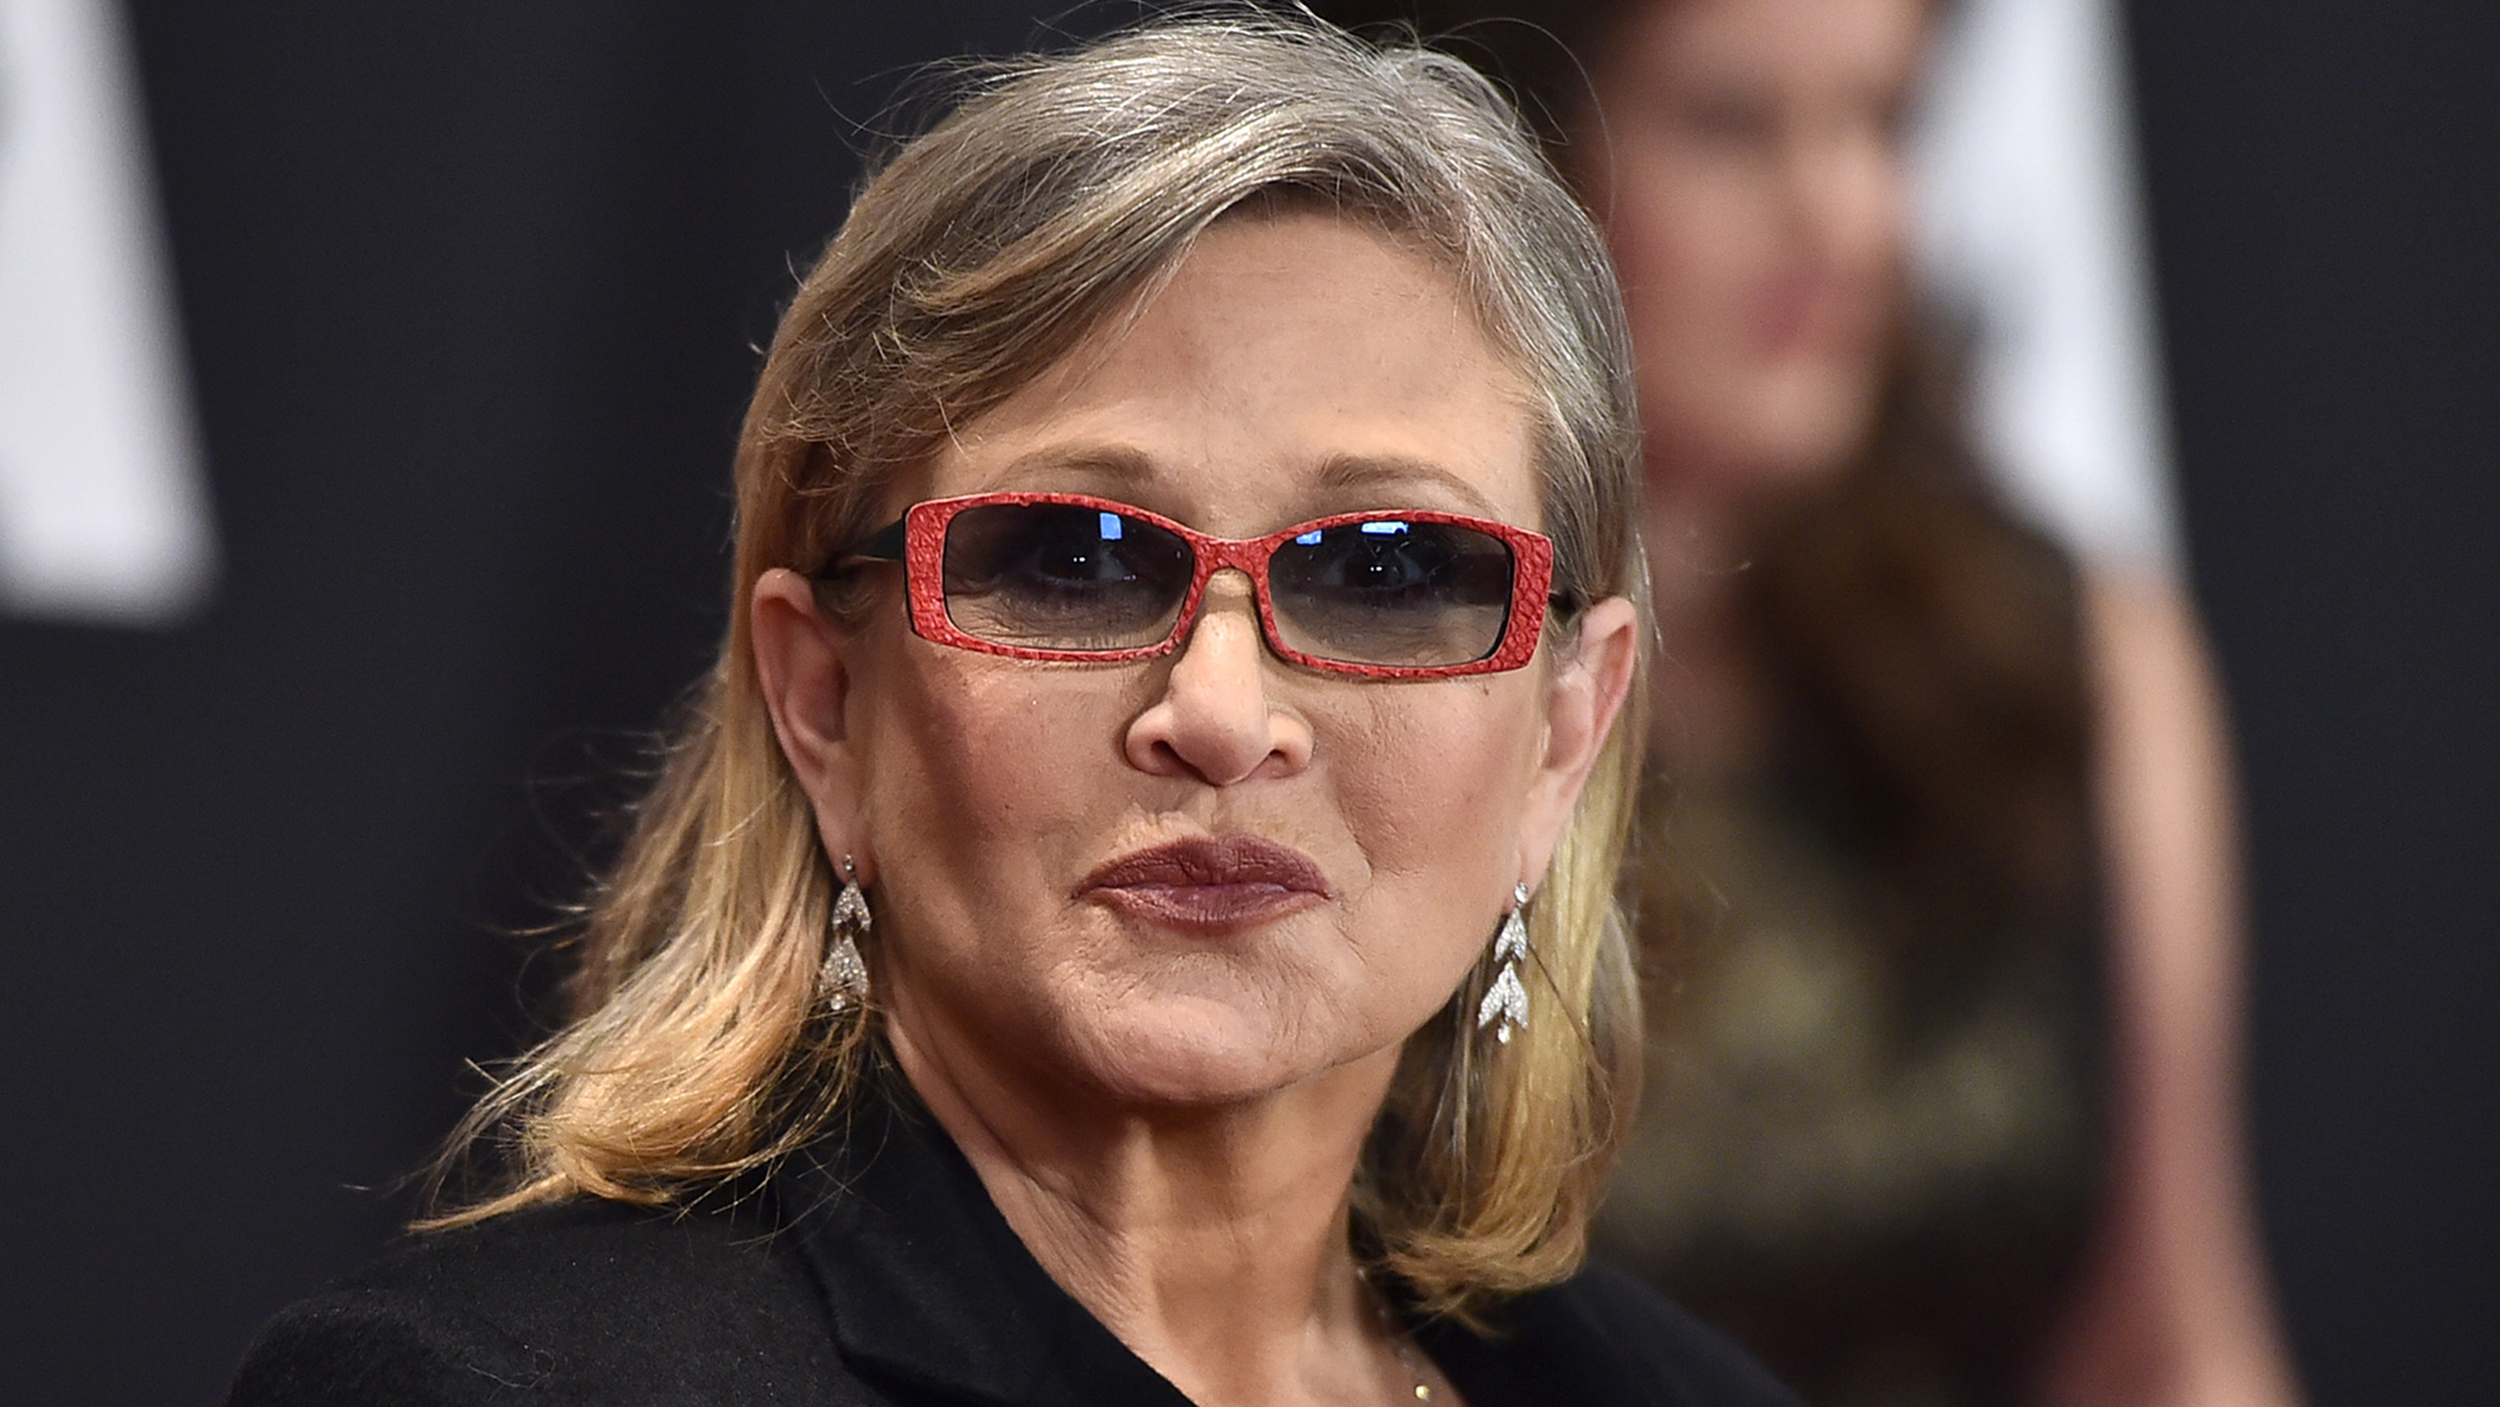 Carrie Fisher Backgrounds, Compatible - PC, Mobile, Gadgets| 2500x1407 px